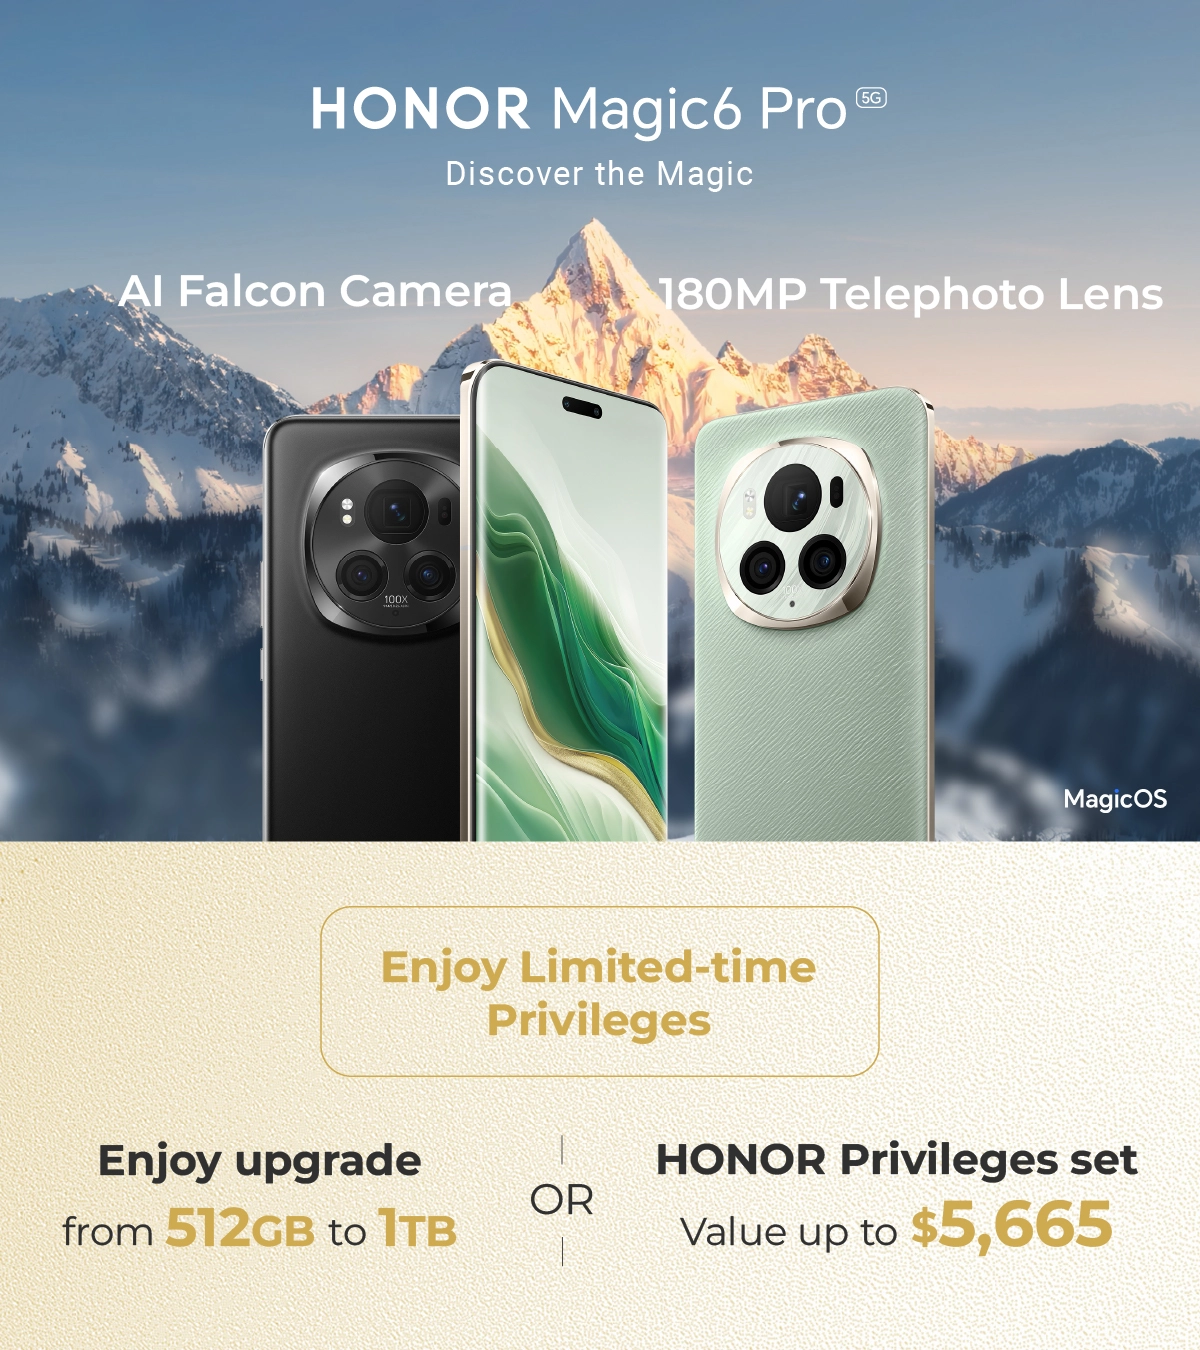 $0 Handset price, monthly fee $348 to enjoy HONOR Magic6 Pro 5G, Free delivery.